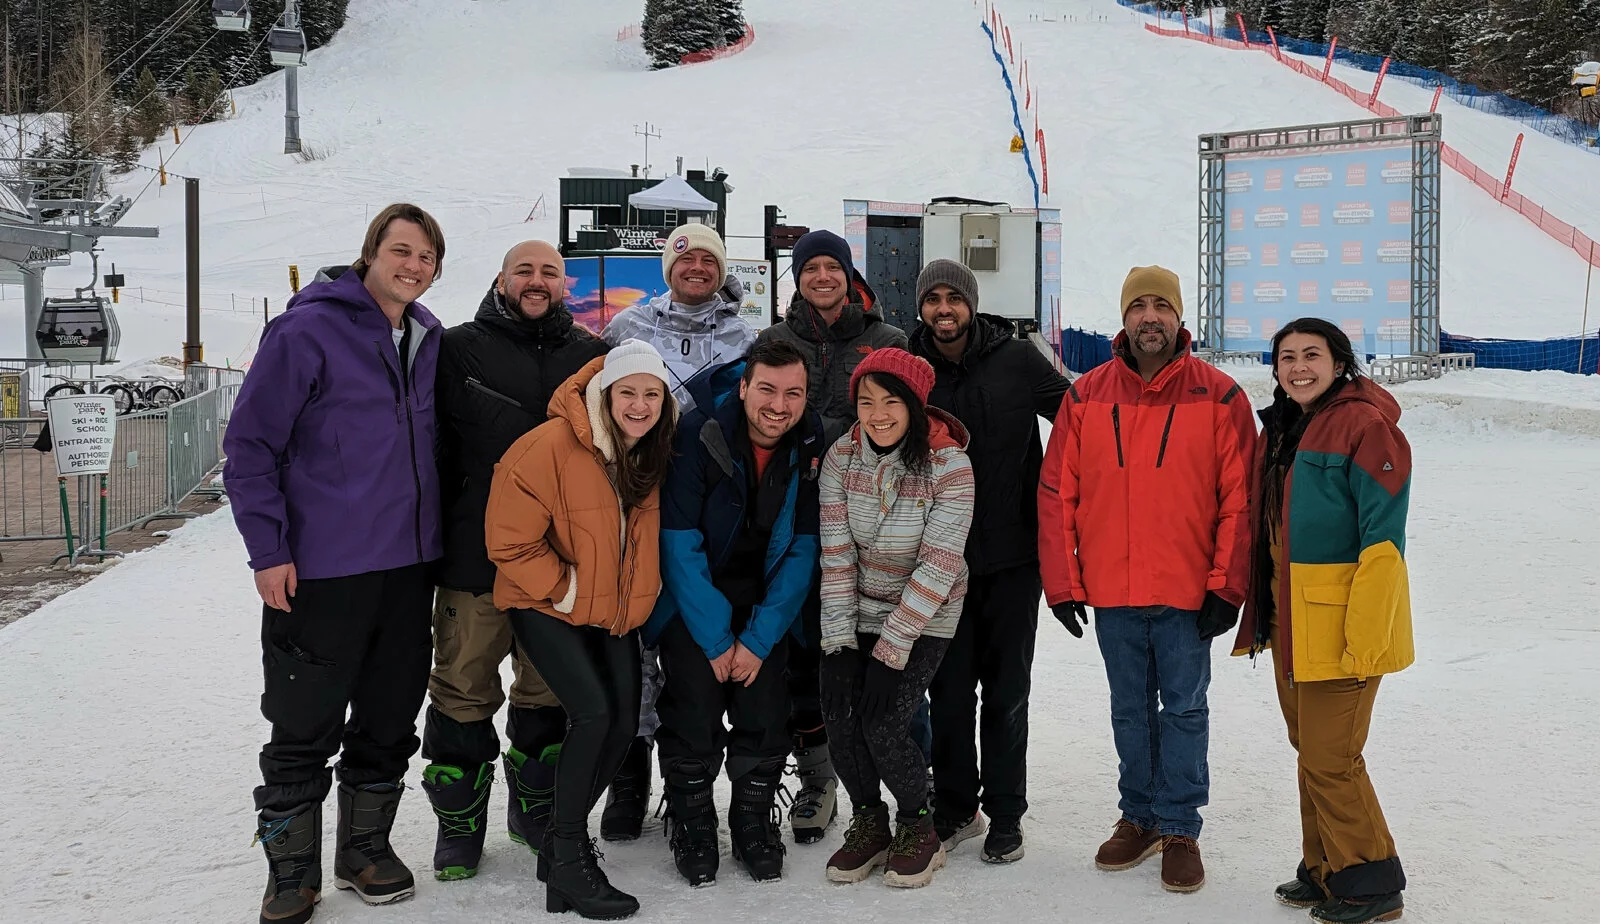 What's the best team-building activity? According to our Denver team, it's skiing! 2023/03/Denver_Team-Ski-Day.jpg 